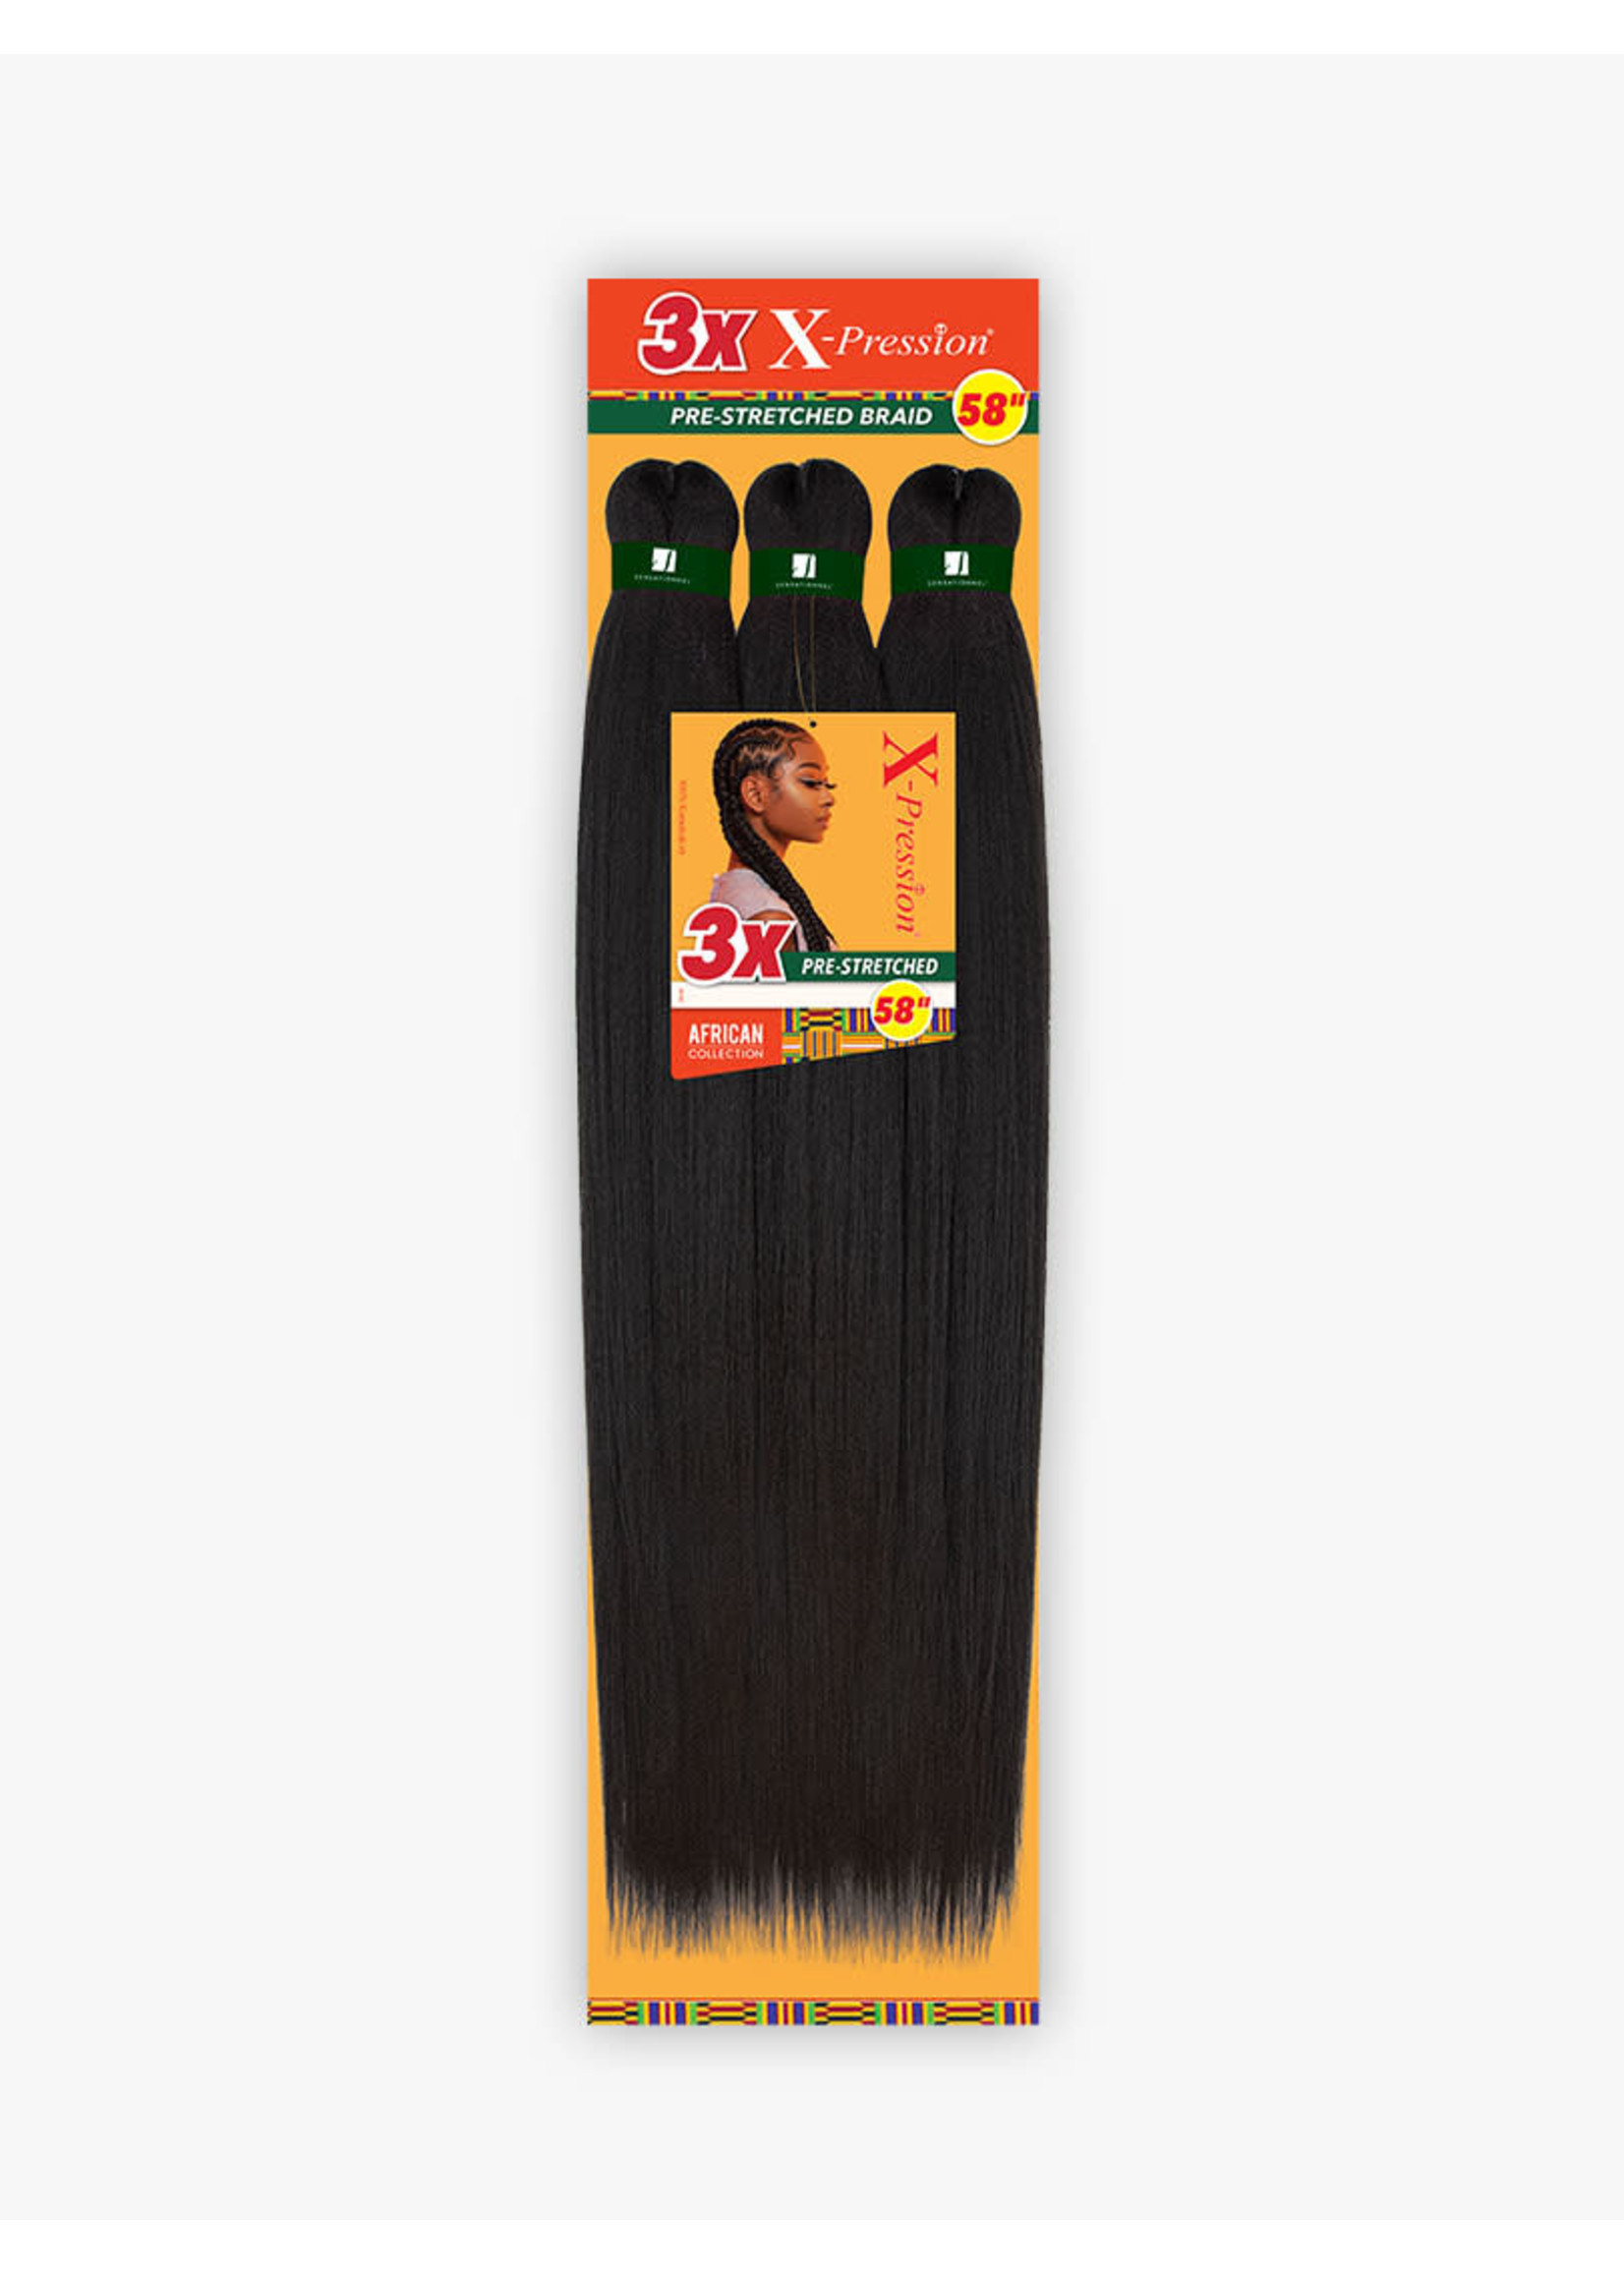 African Collection 3x X-pression Pre-Stretched Braid 58"